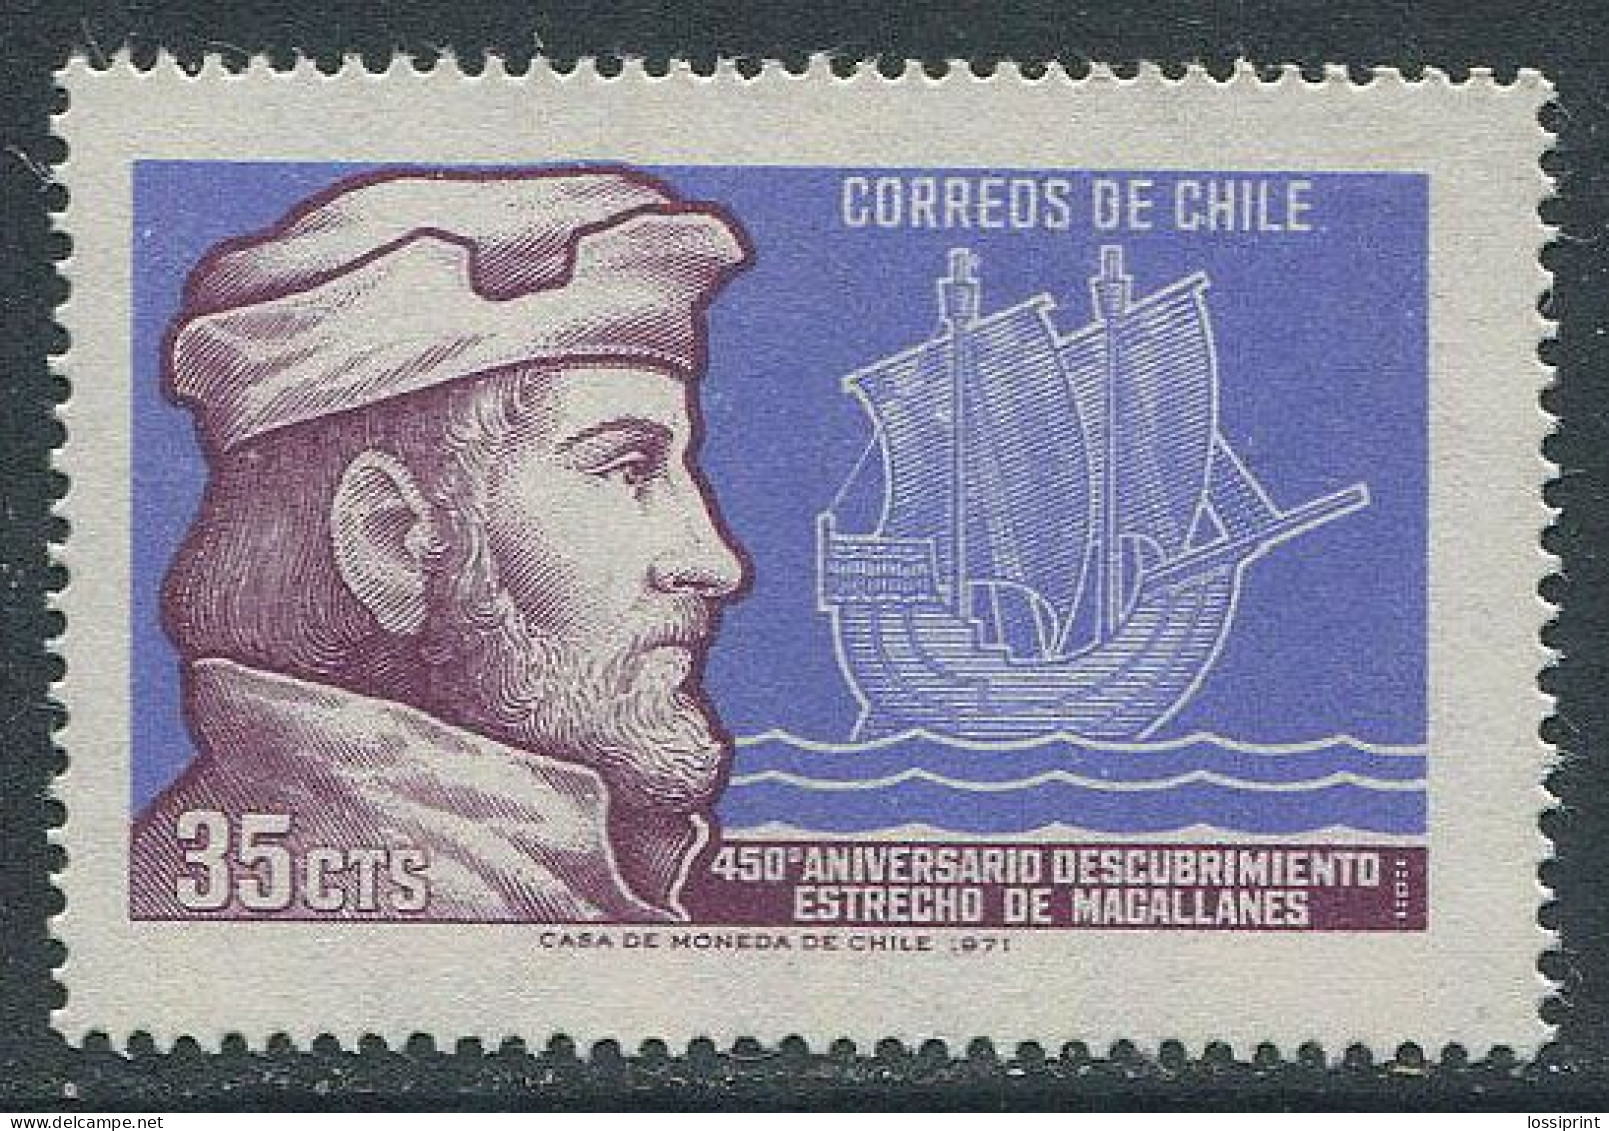 Chile:Unused Stamp 450 Years From Magalhaes Exhibition, Sailing Ship, Old Ship, 1971, MNH - Schiffe